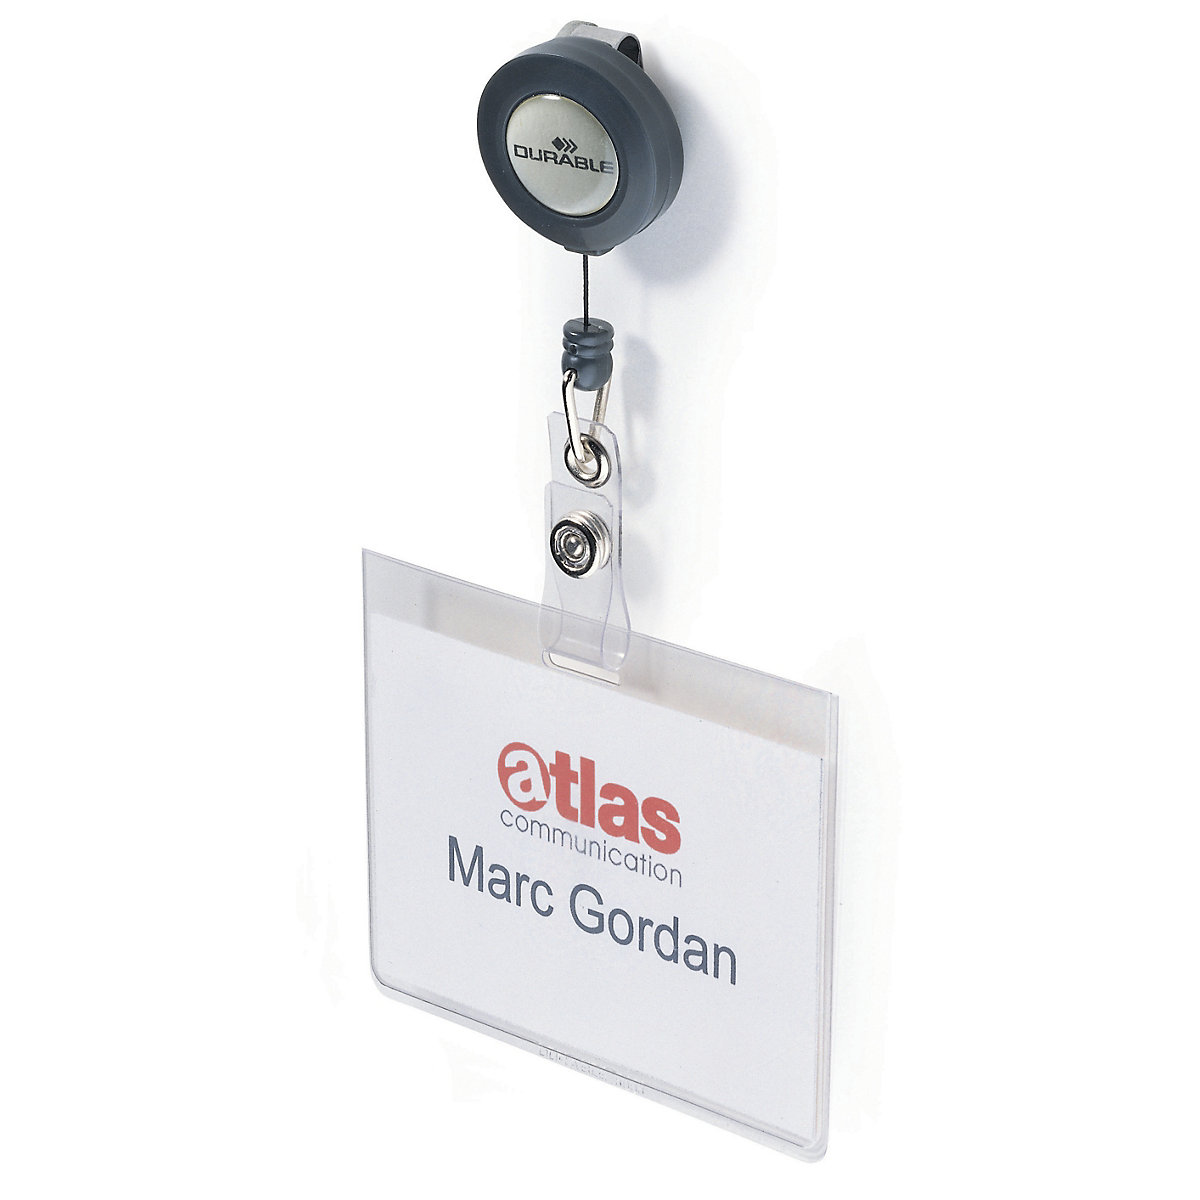 Name badge with retractable string - DURABLE